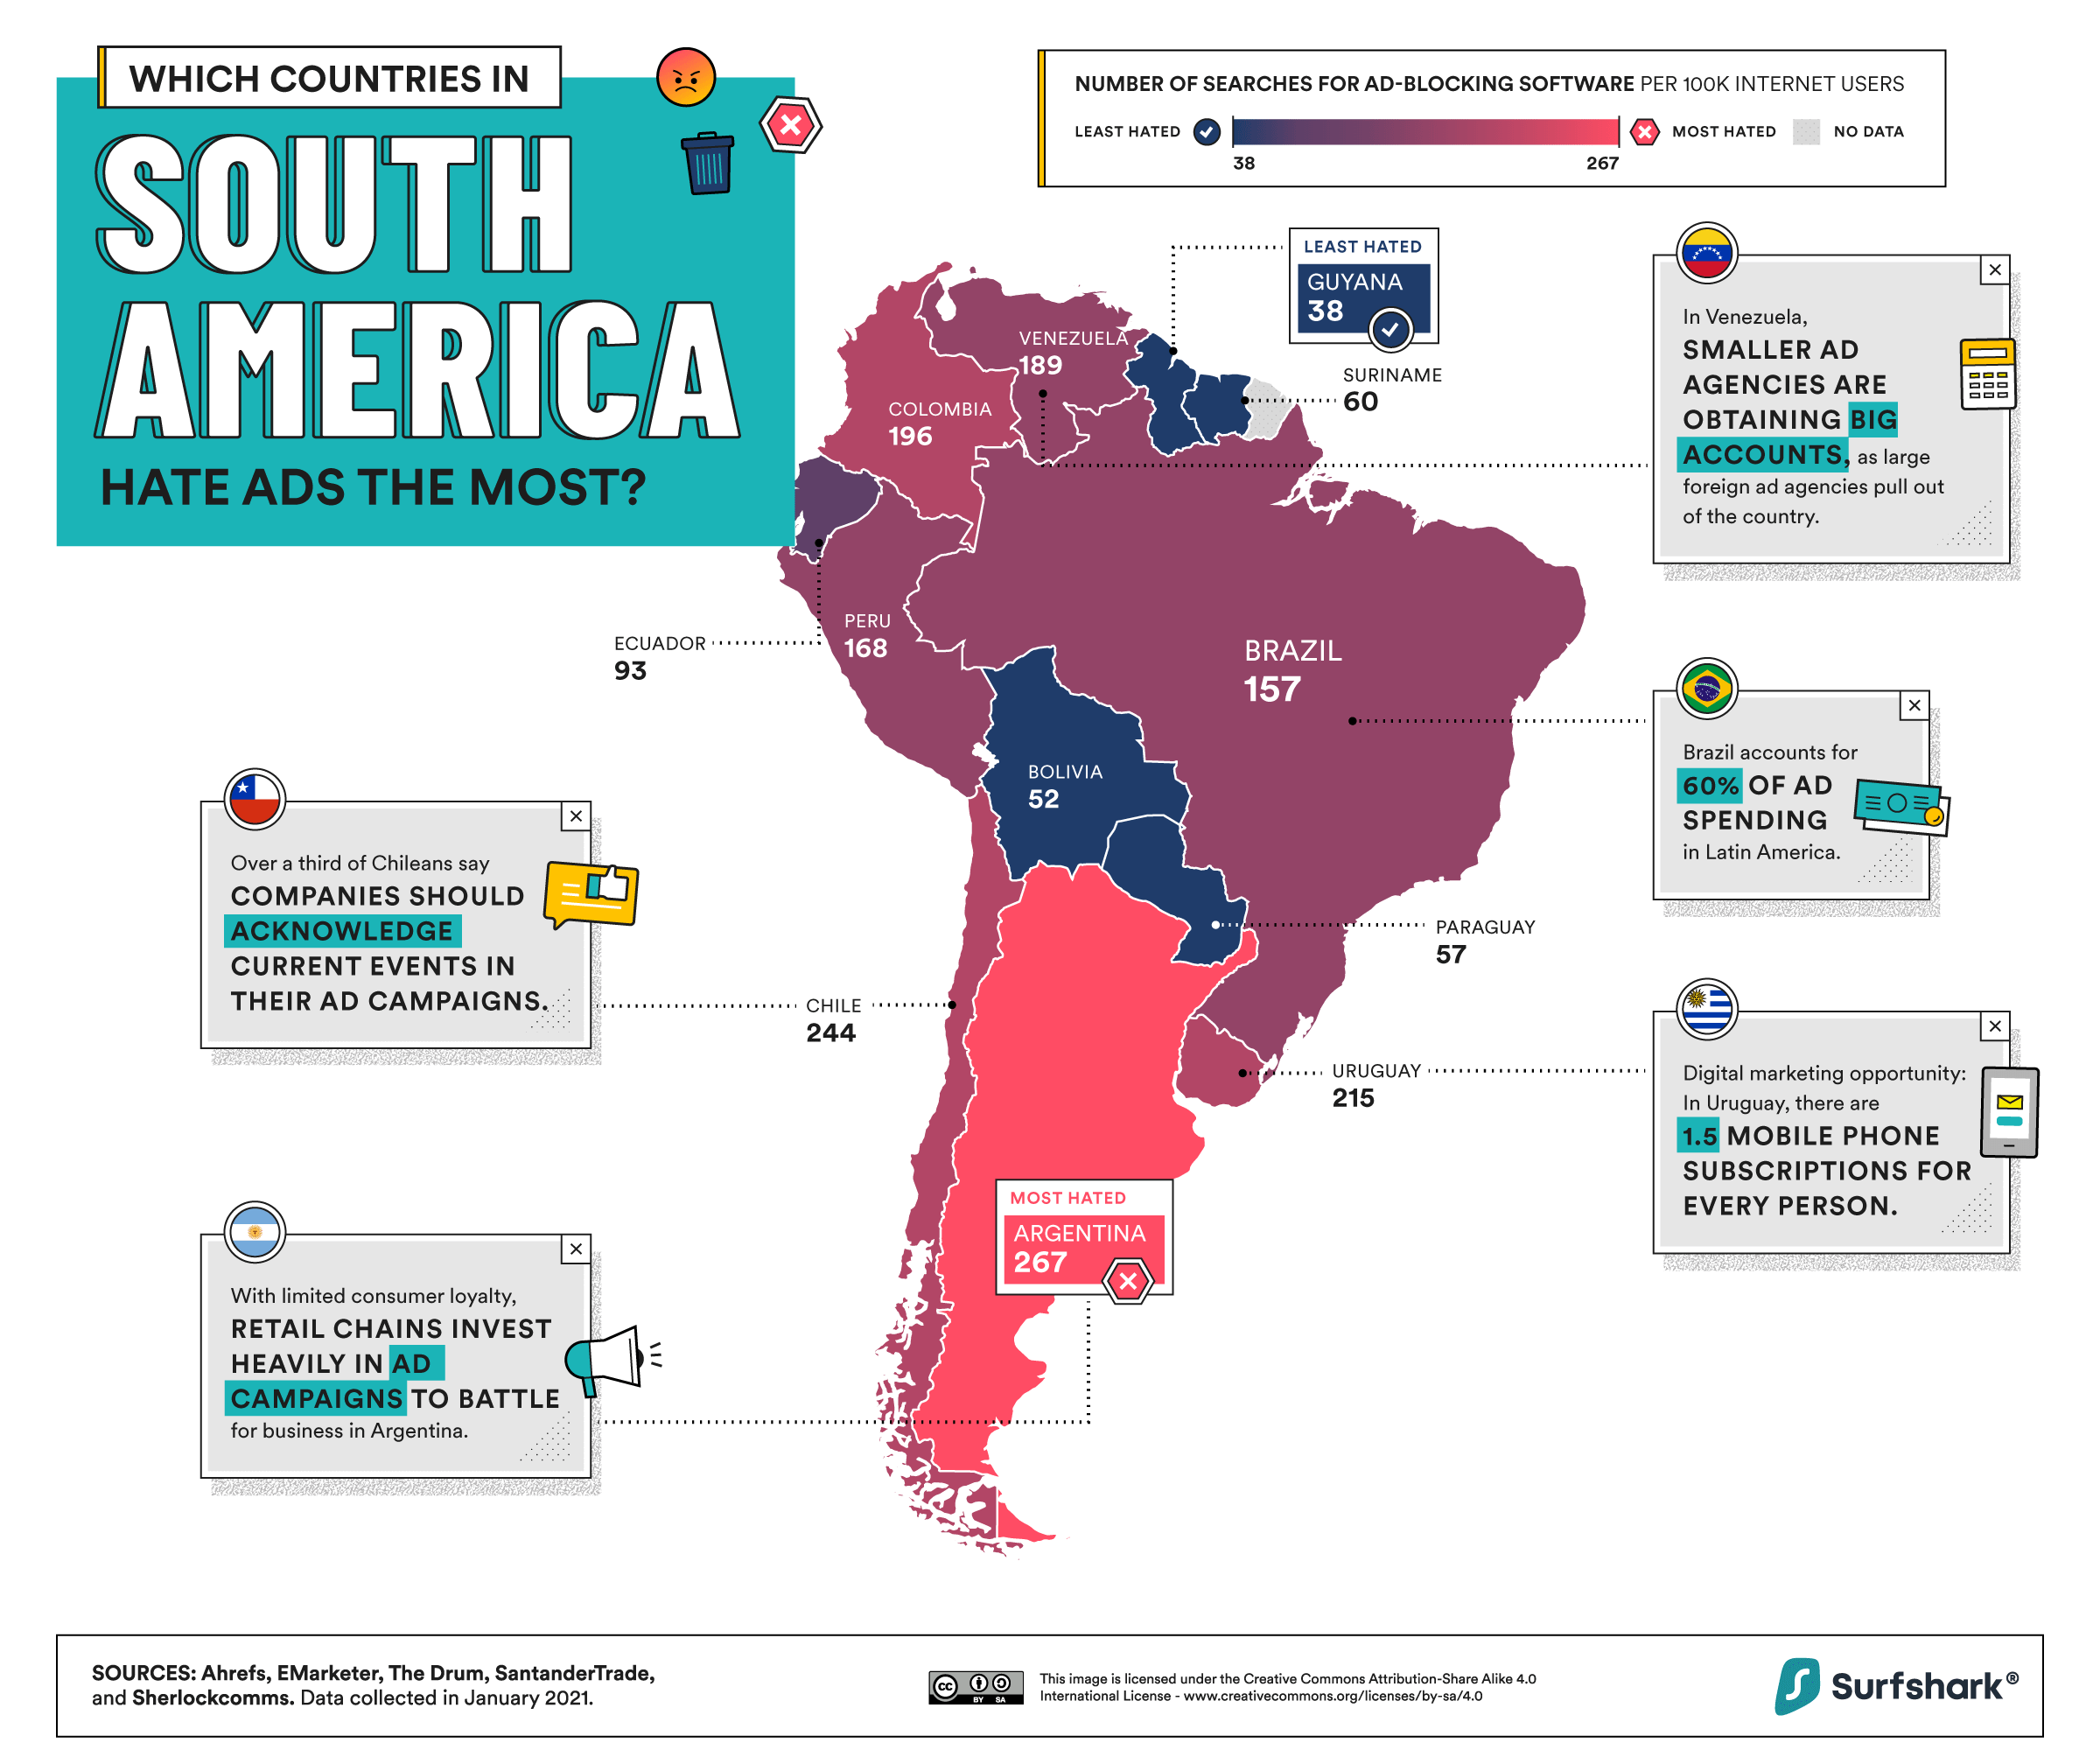 a map that shows which countries in South America made the most Google searches for ad blocking software